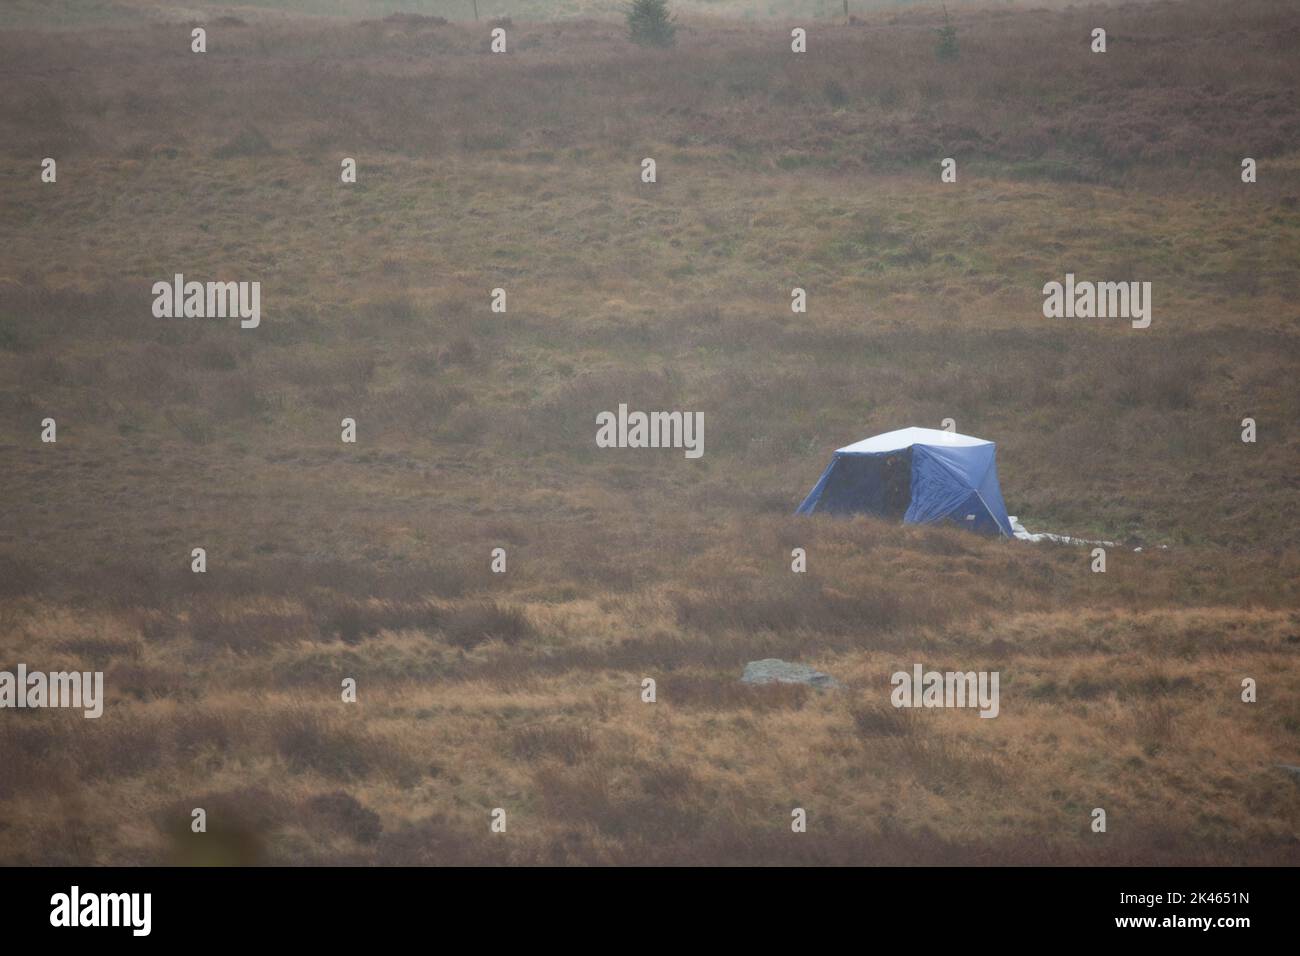 Saddleworth Moor Oldham Greater Manchester, 30.9.2022,  Police search for one of the Moors Murderers victims restarts after potential human remains found on moorland in Saddleworth Peter Liggins/Alamy Live News Stock Photo